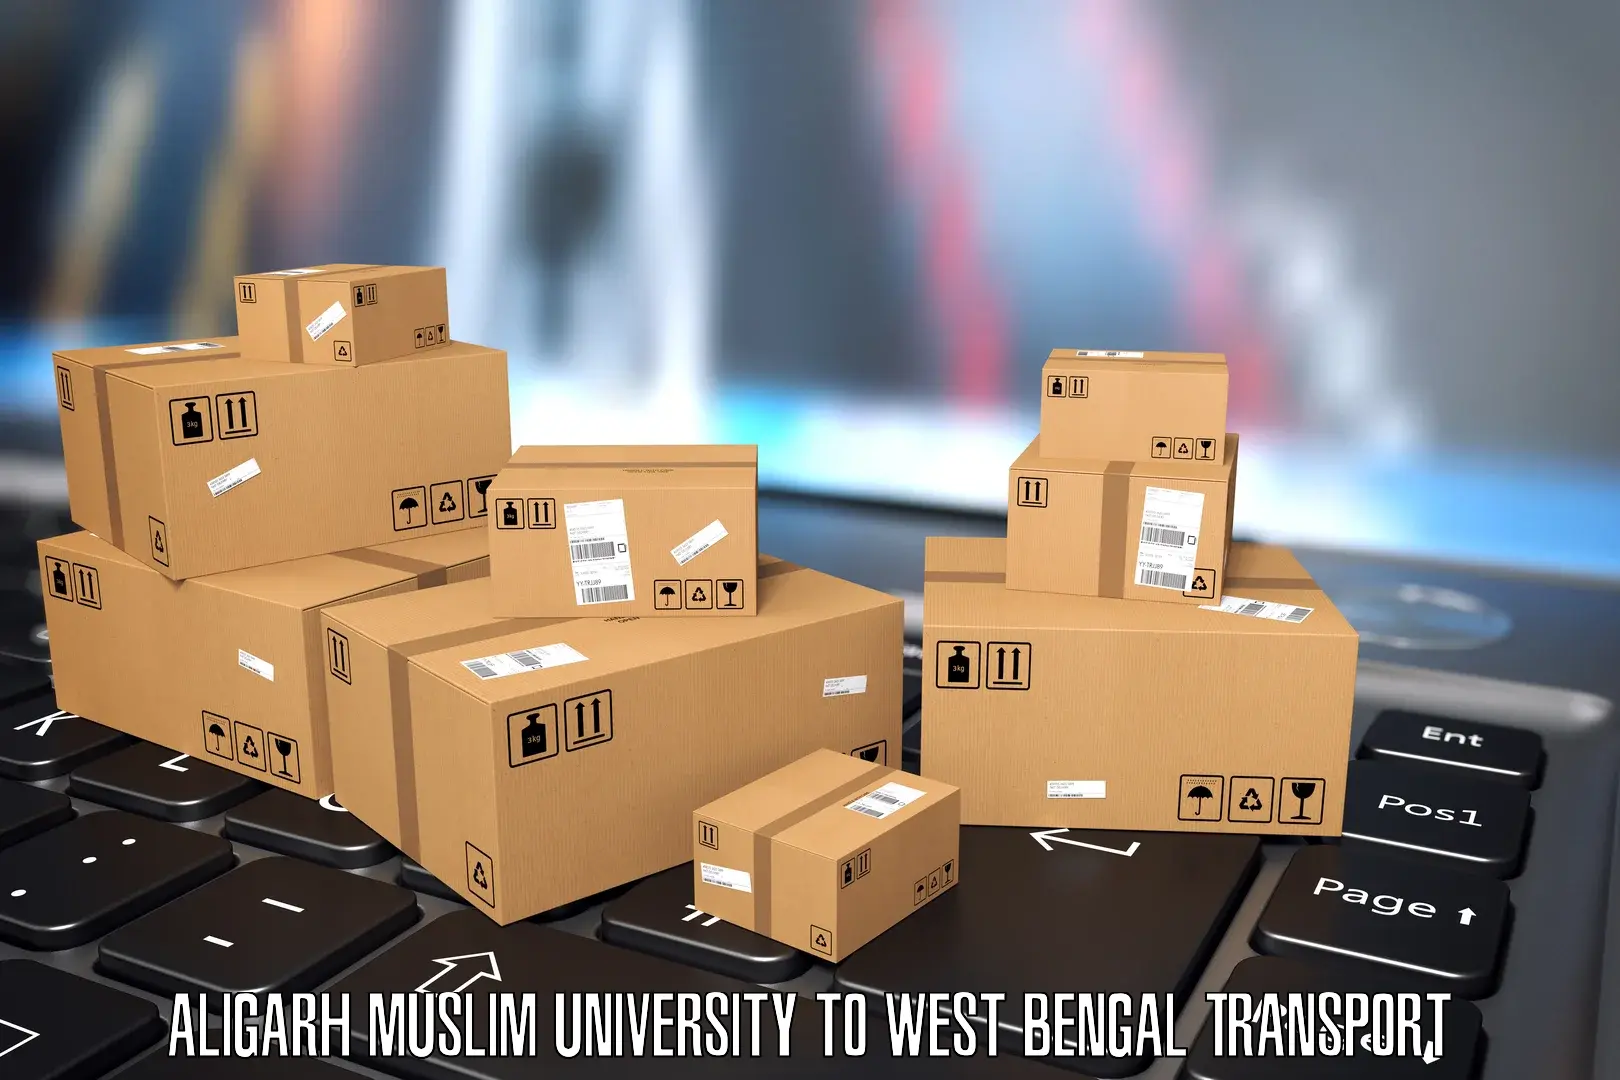 Vehicle transport services Aligarh Muslim University to West Bengal